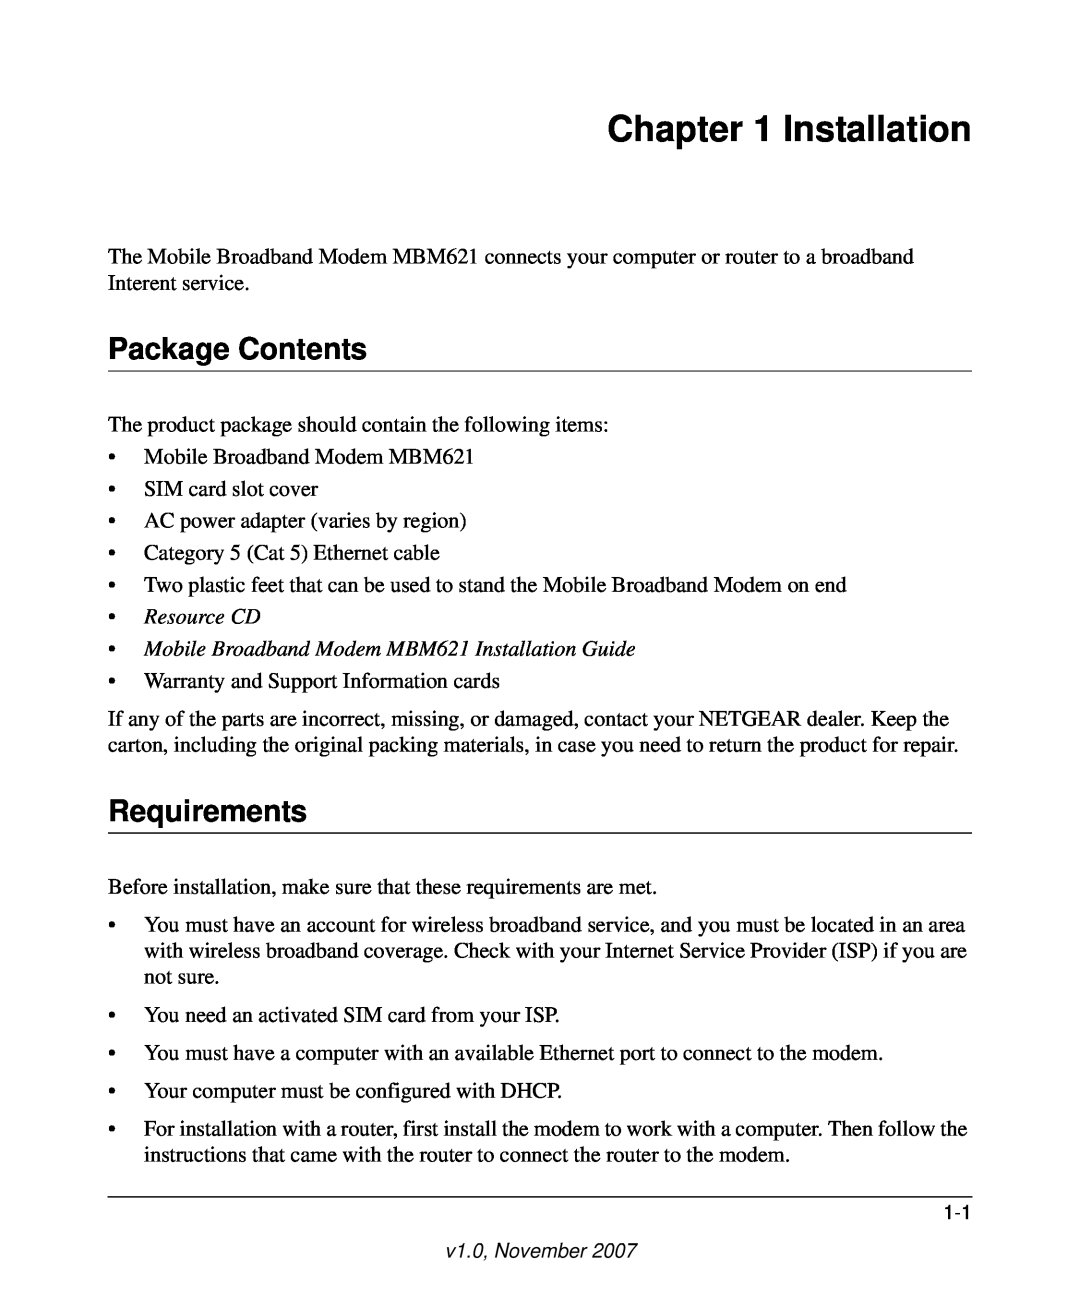 NETGEAR user manual Package Contents, Requirements, Resource CD Mobile Broadband Modem MBM621 Installation Guide 